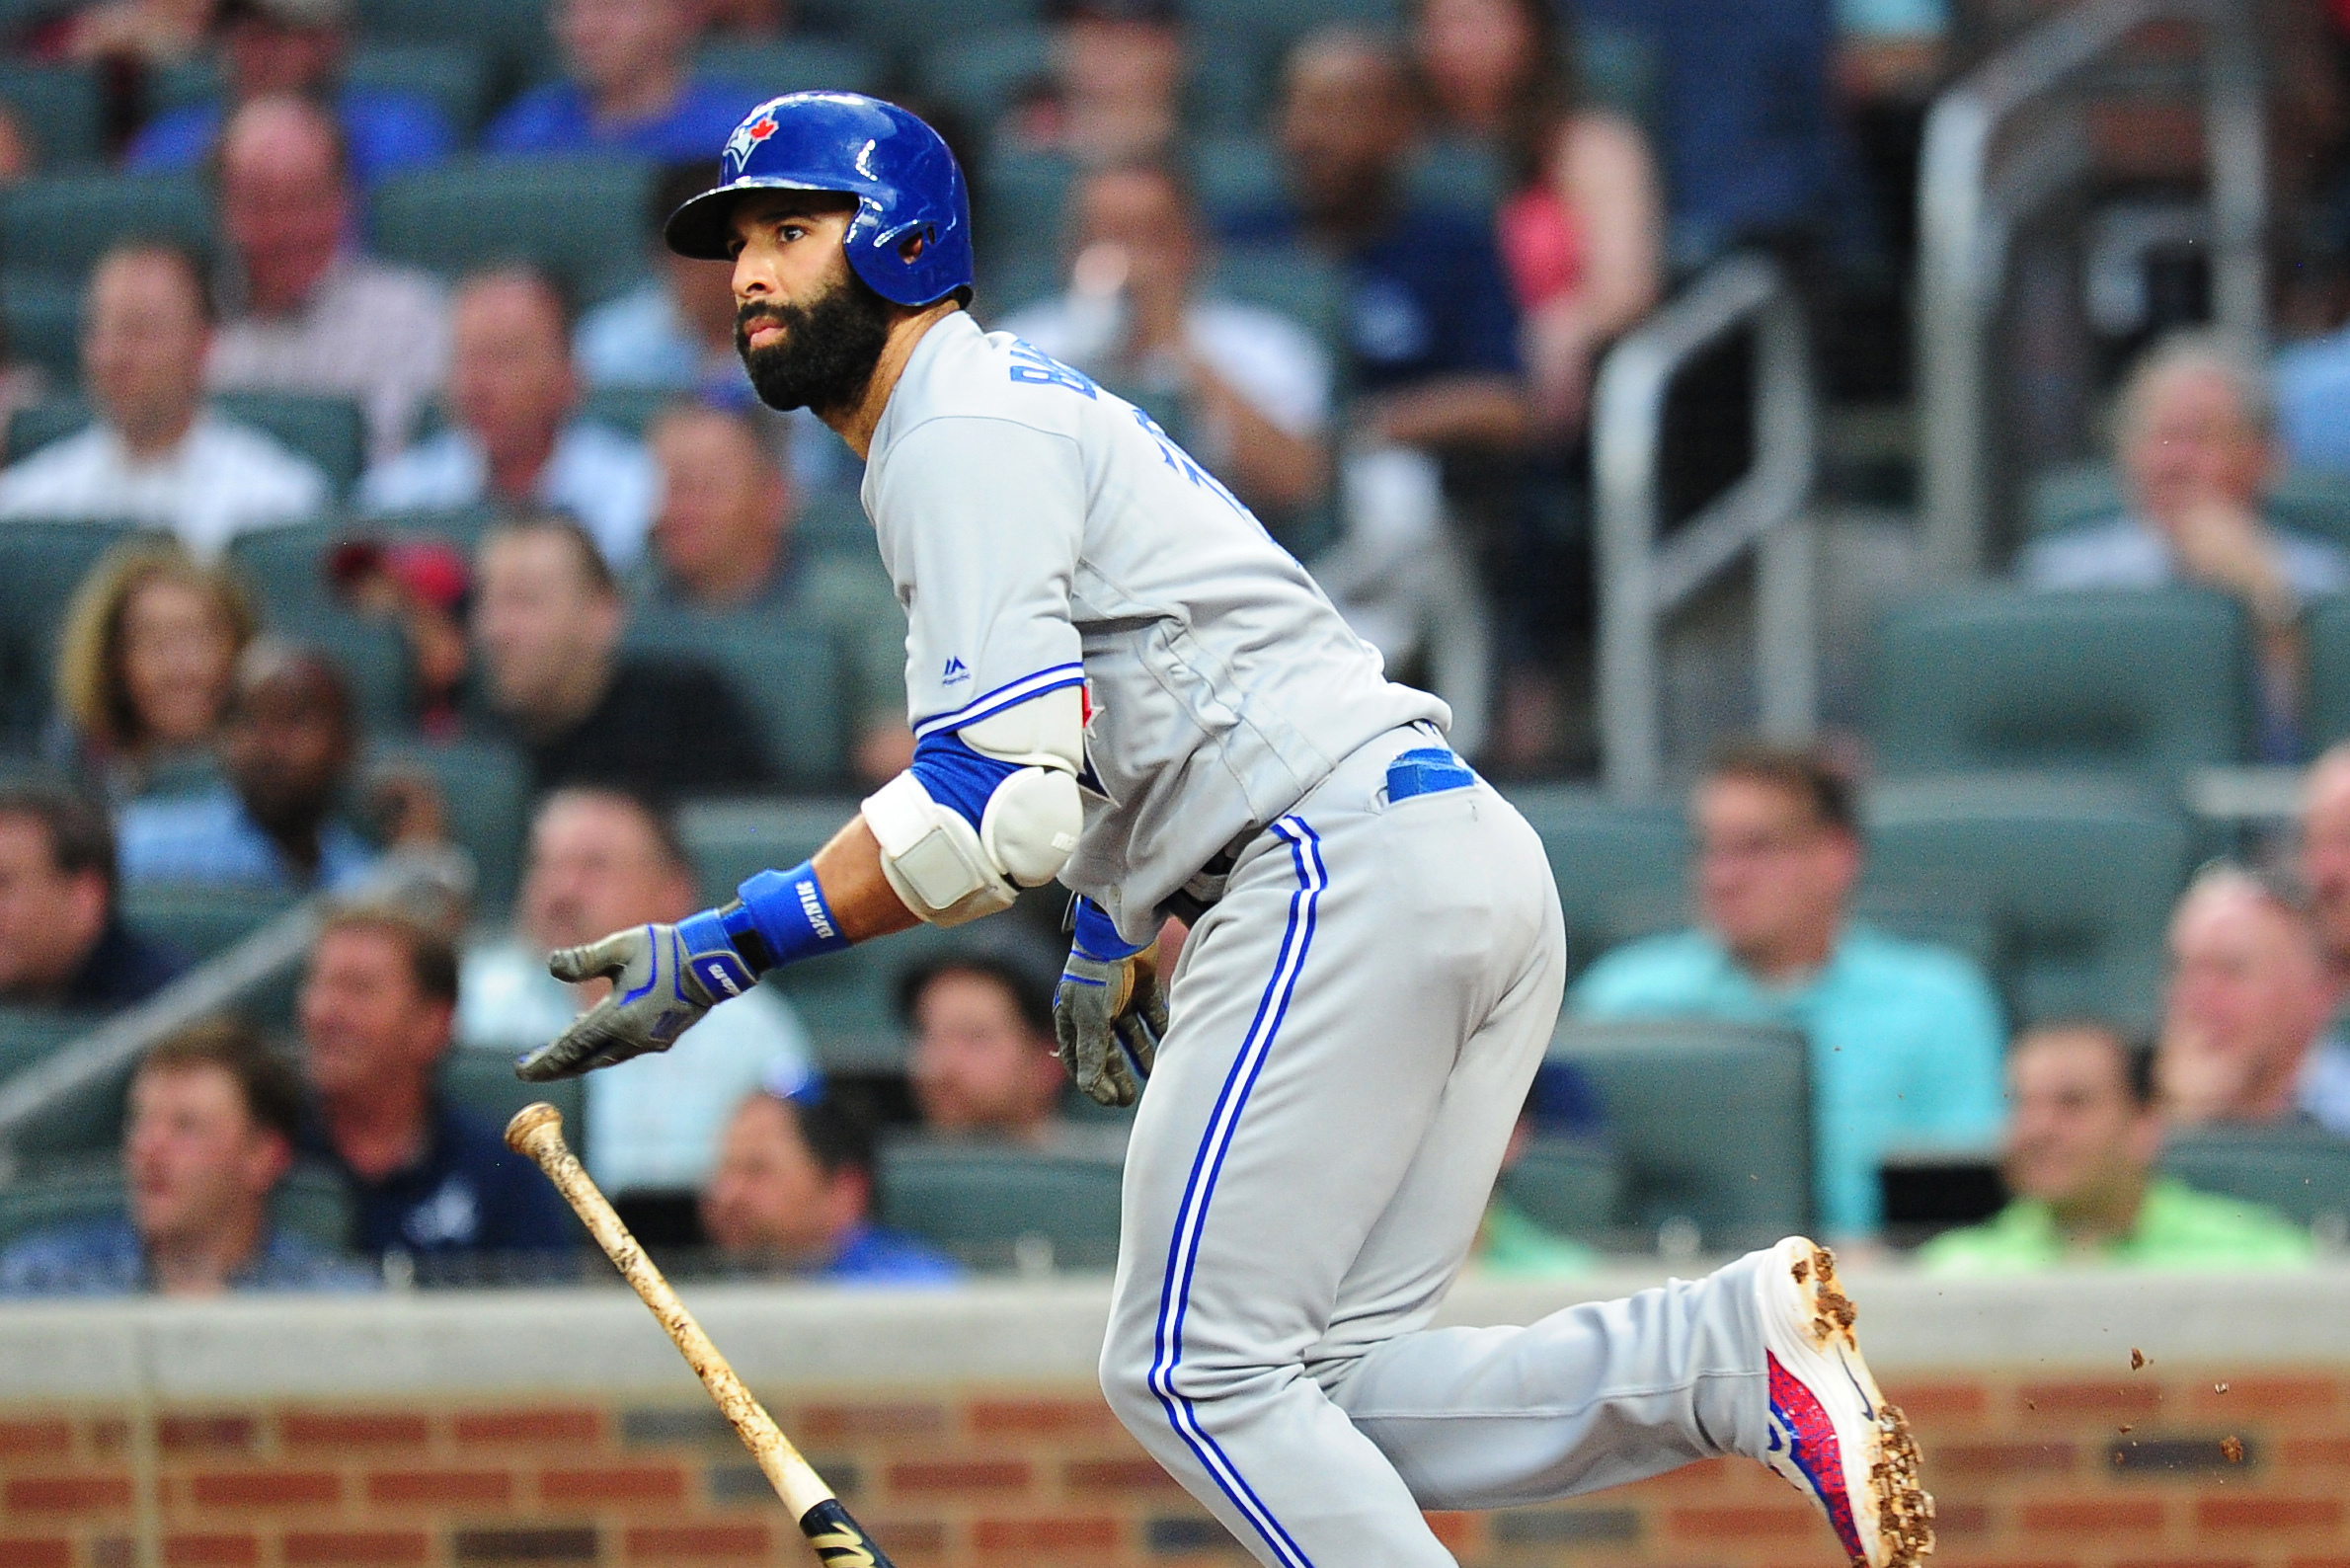 Jose Bautista's bat flip: Watch it again and again - The Globe and Mail